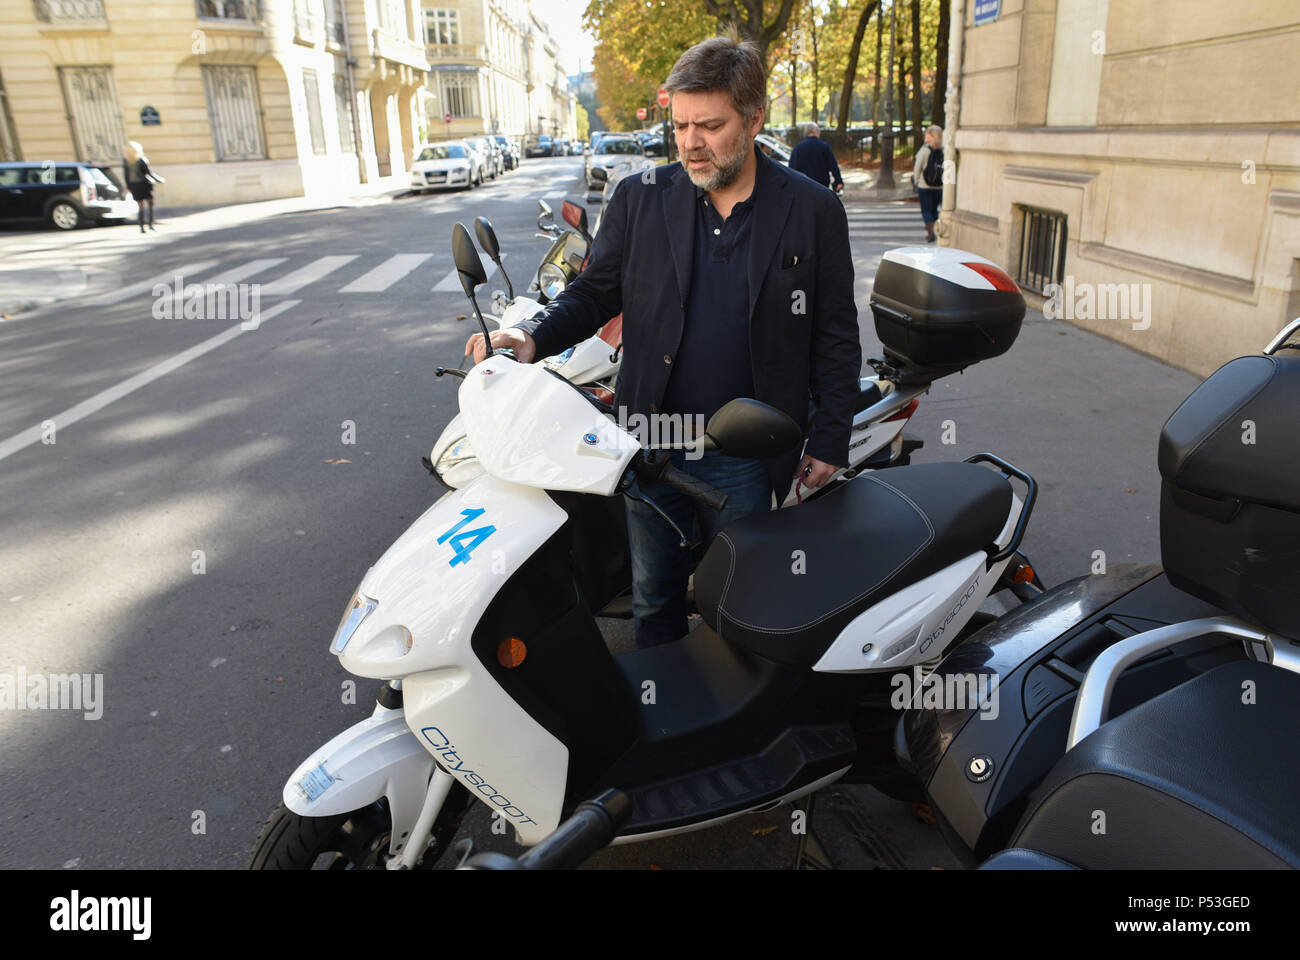 October 9, 2015 - Paris, France: Bertrand Fleurose, head of Cityscoot,  checks an electric scooter that will soon be available as part of a  self-service rental scheme in Paris. Cityscoot is the